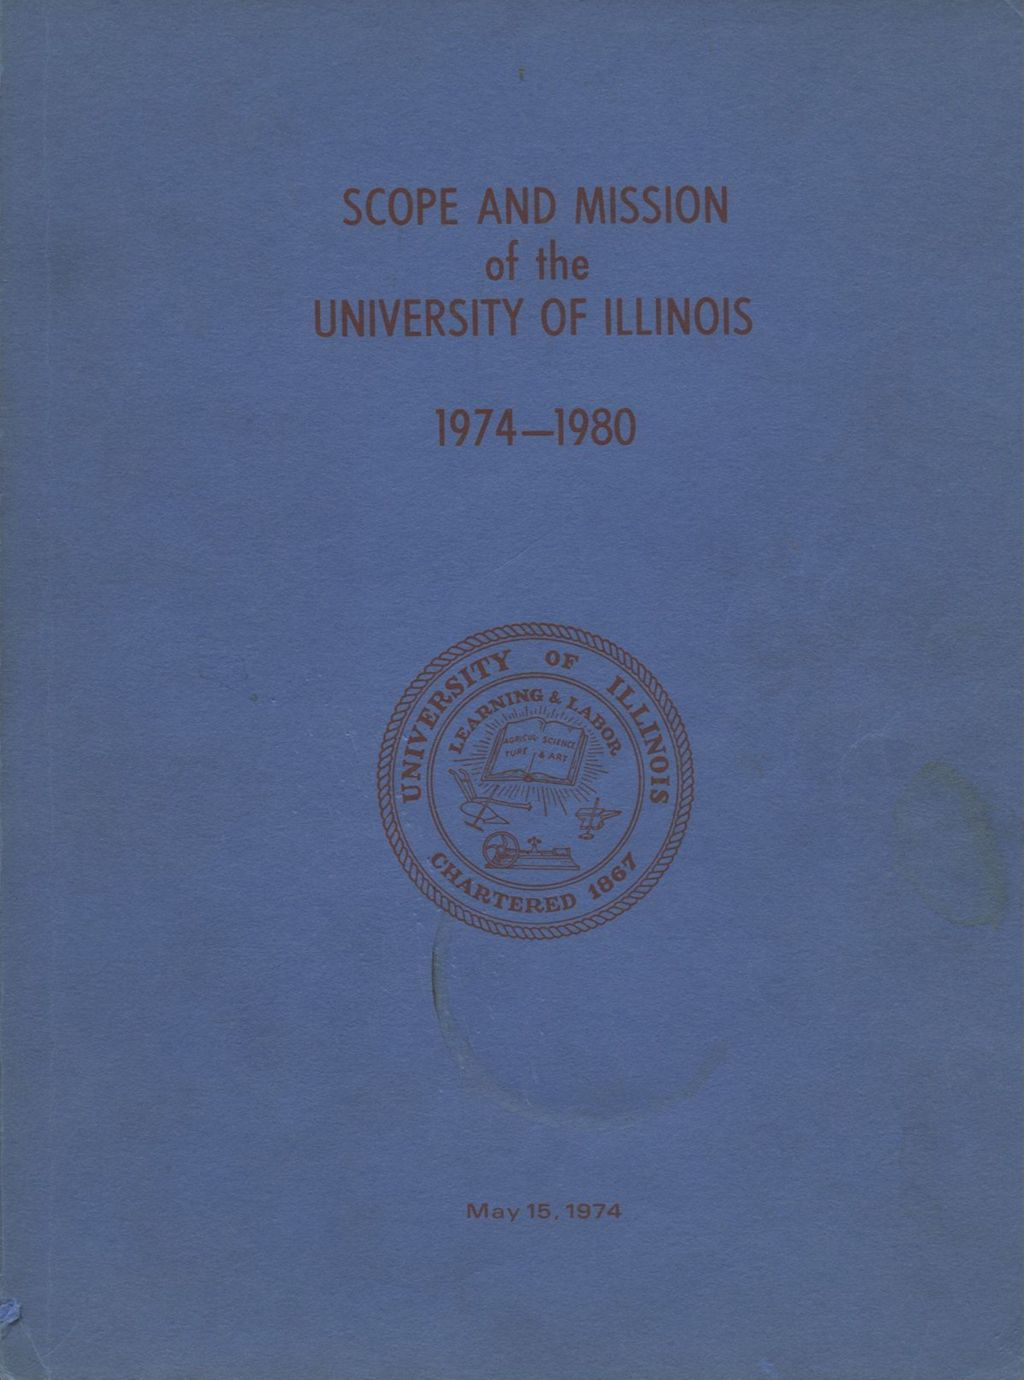 Scope and Mission of the University of Illinois 1974-1980